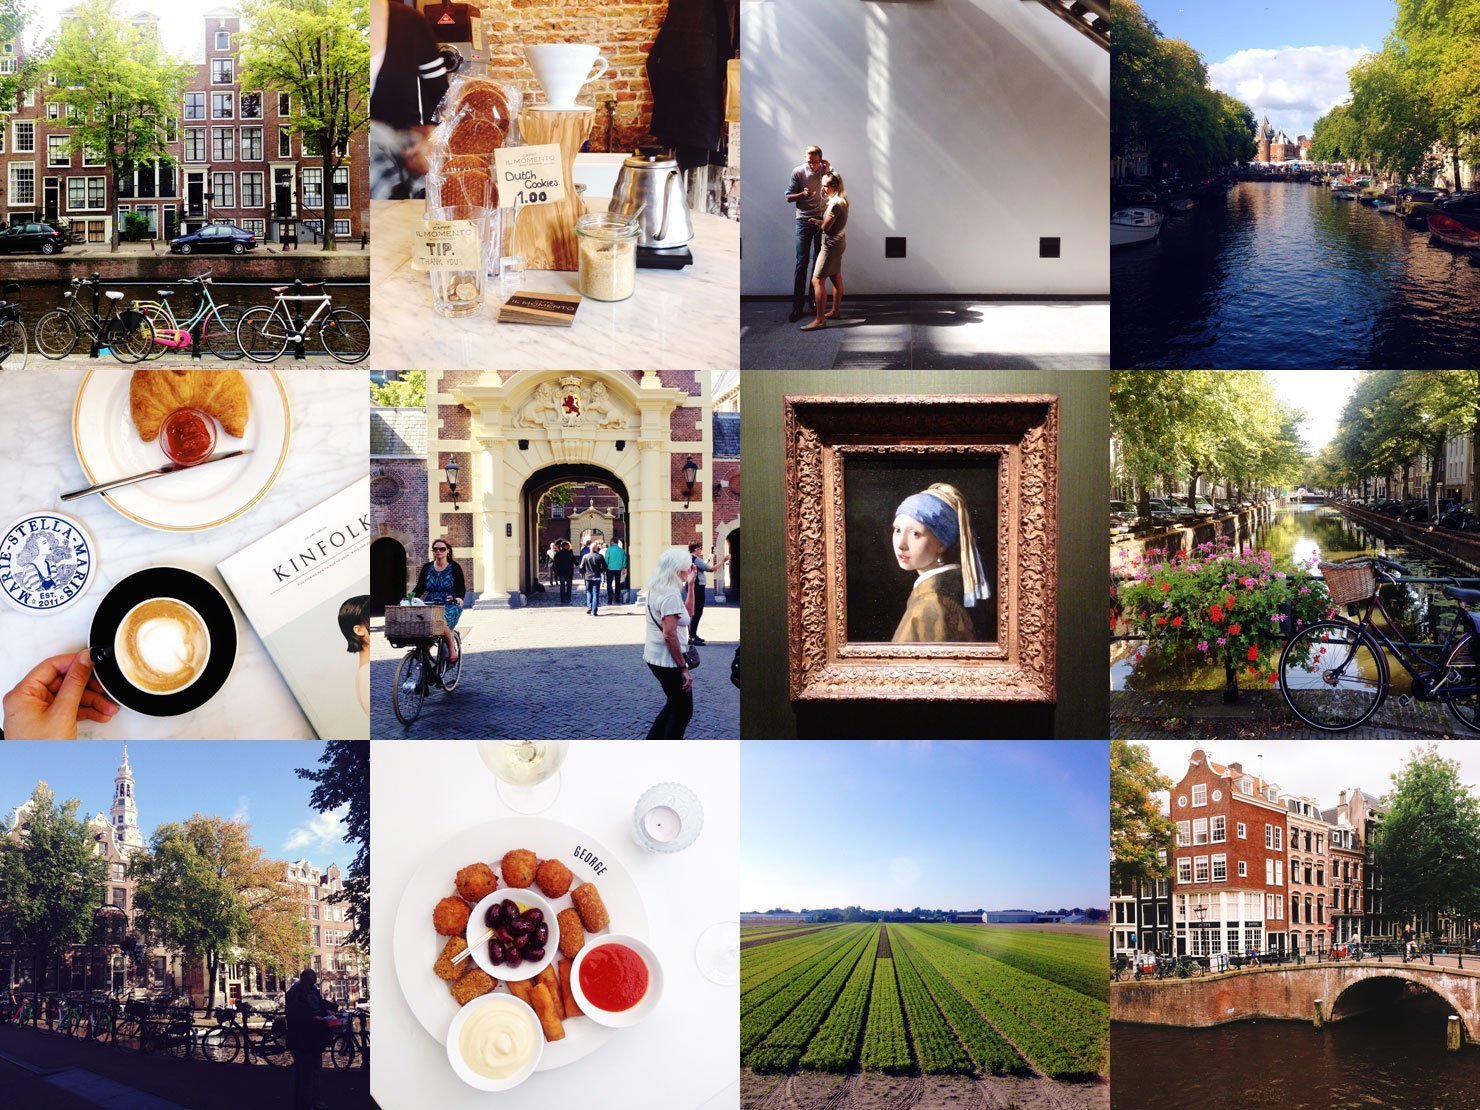 Why you deserve more holidays as an expat. Amsterdam and Den Haag (The Hague) on Instagram.